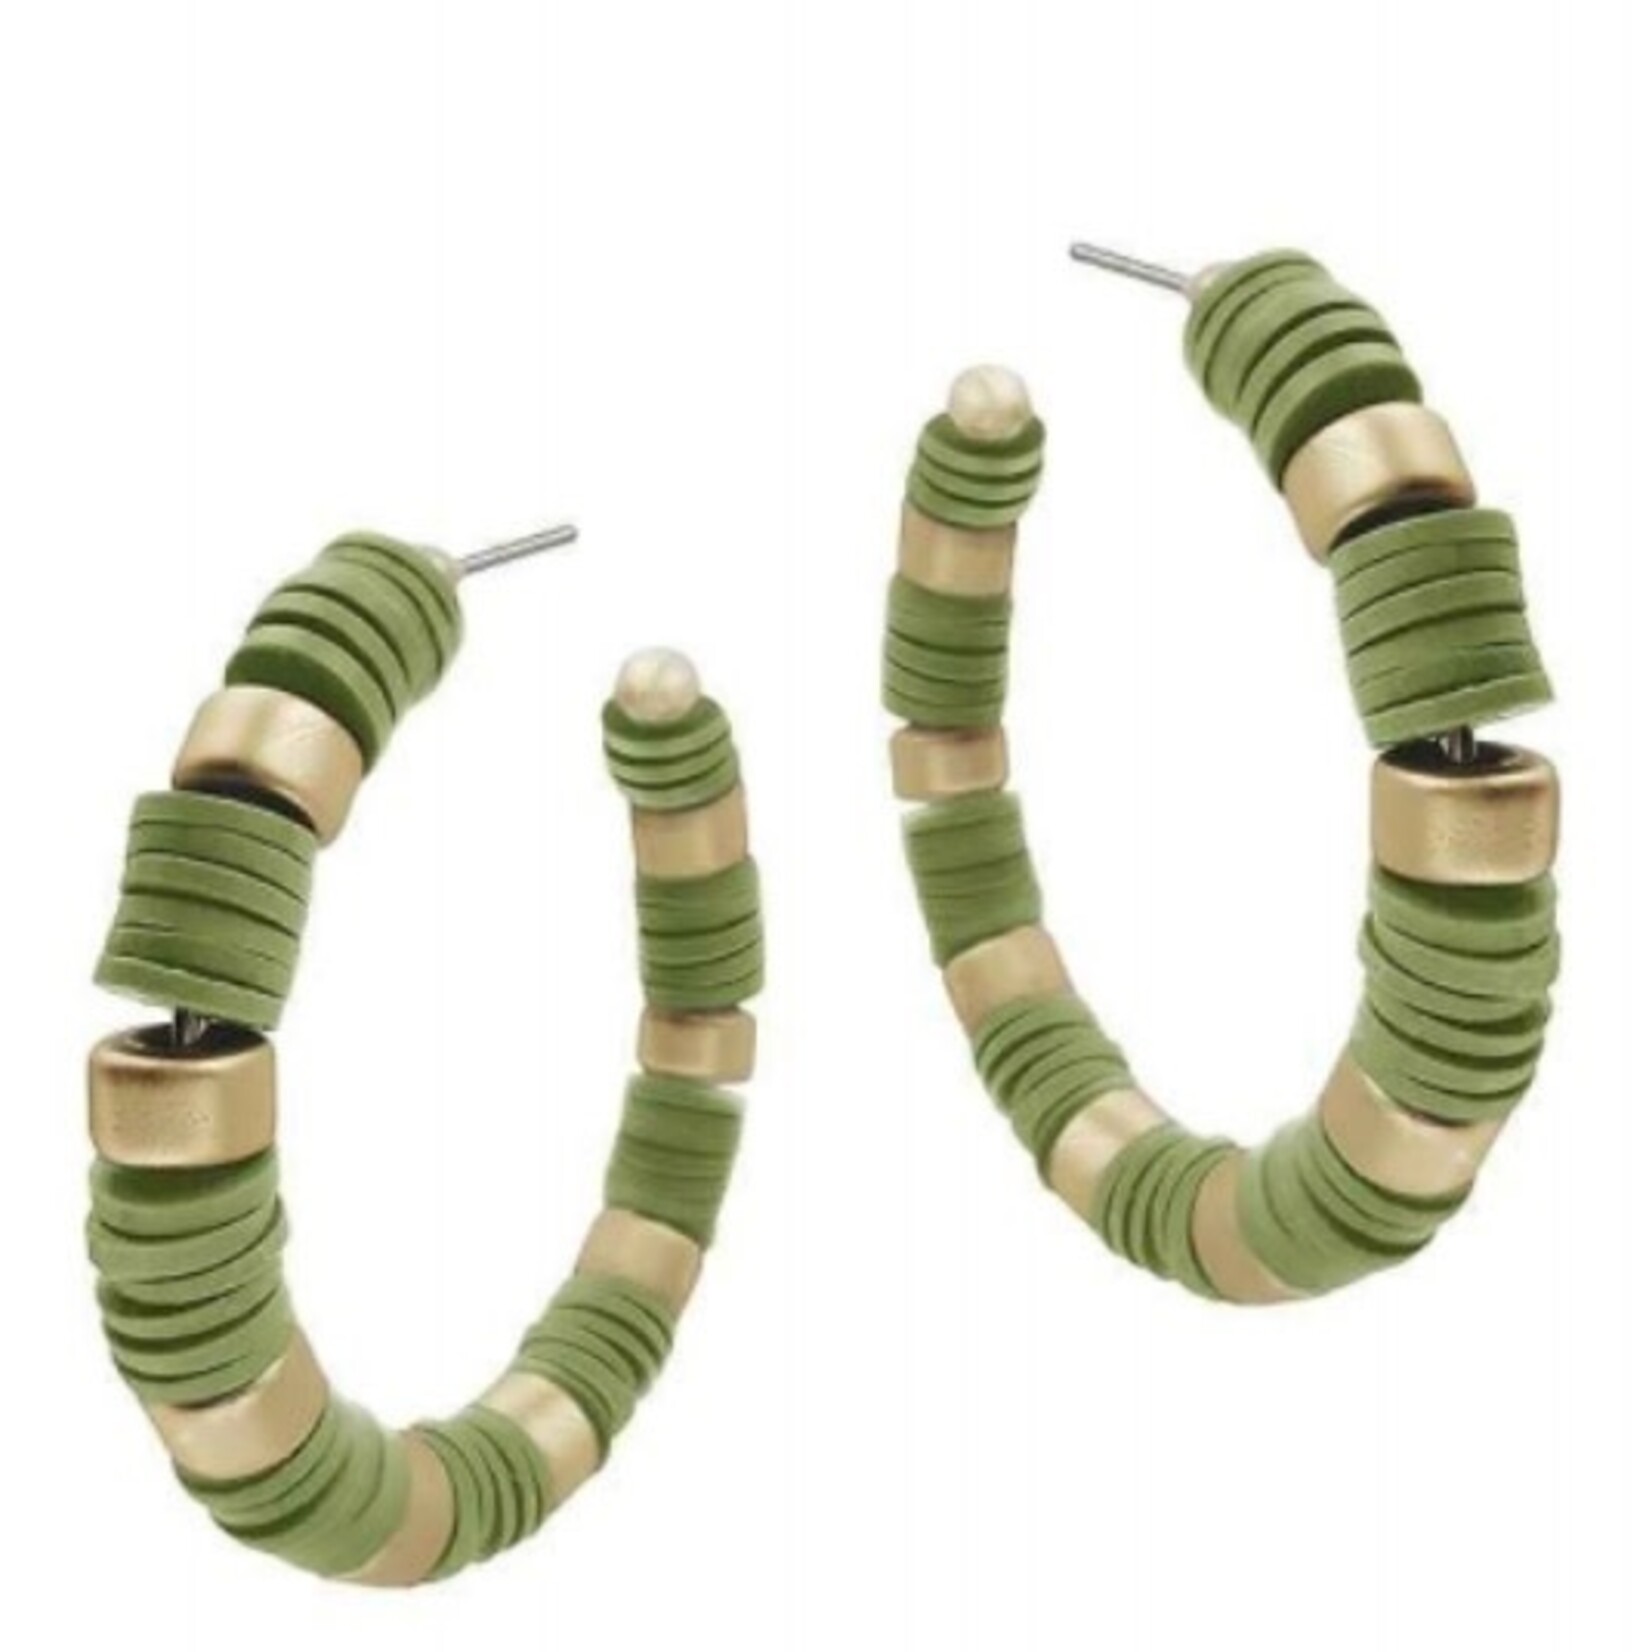 What's hot Olive Green Rubber and Gold 2" Earring